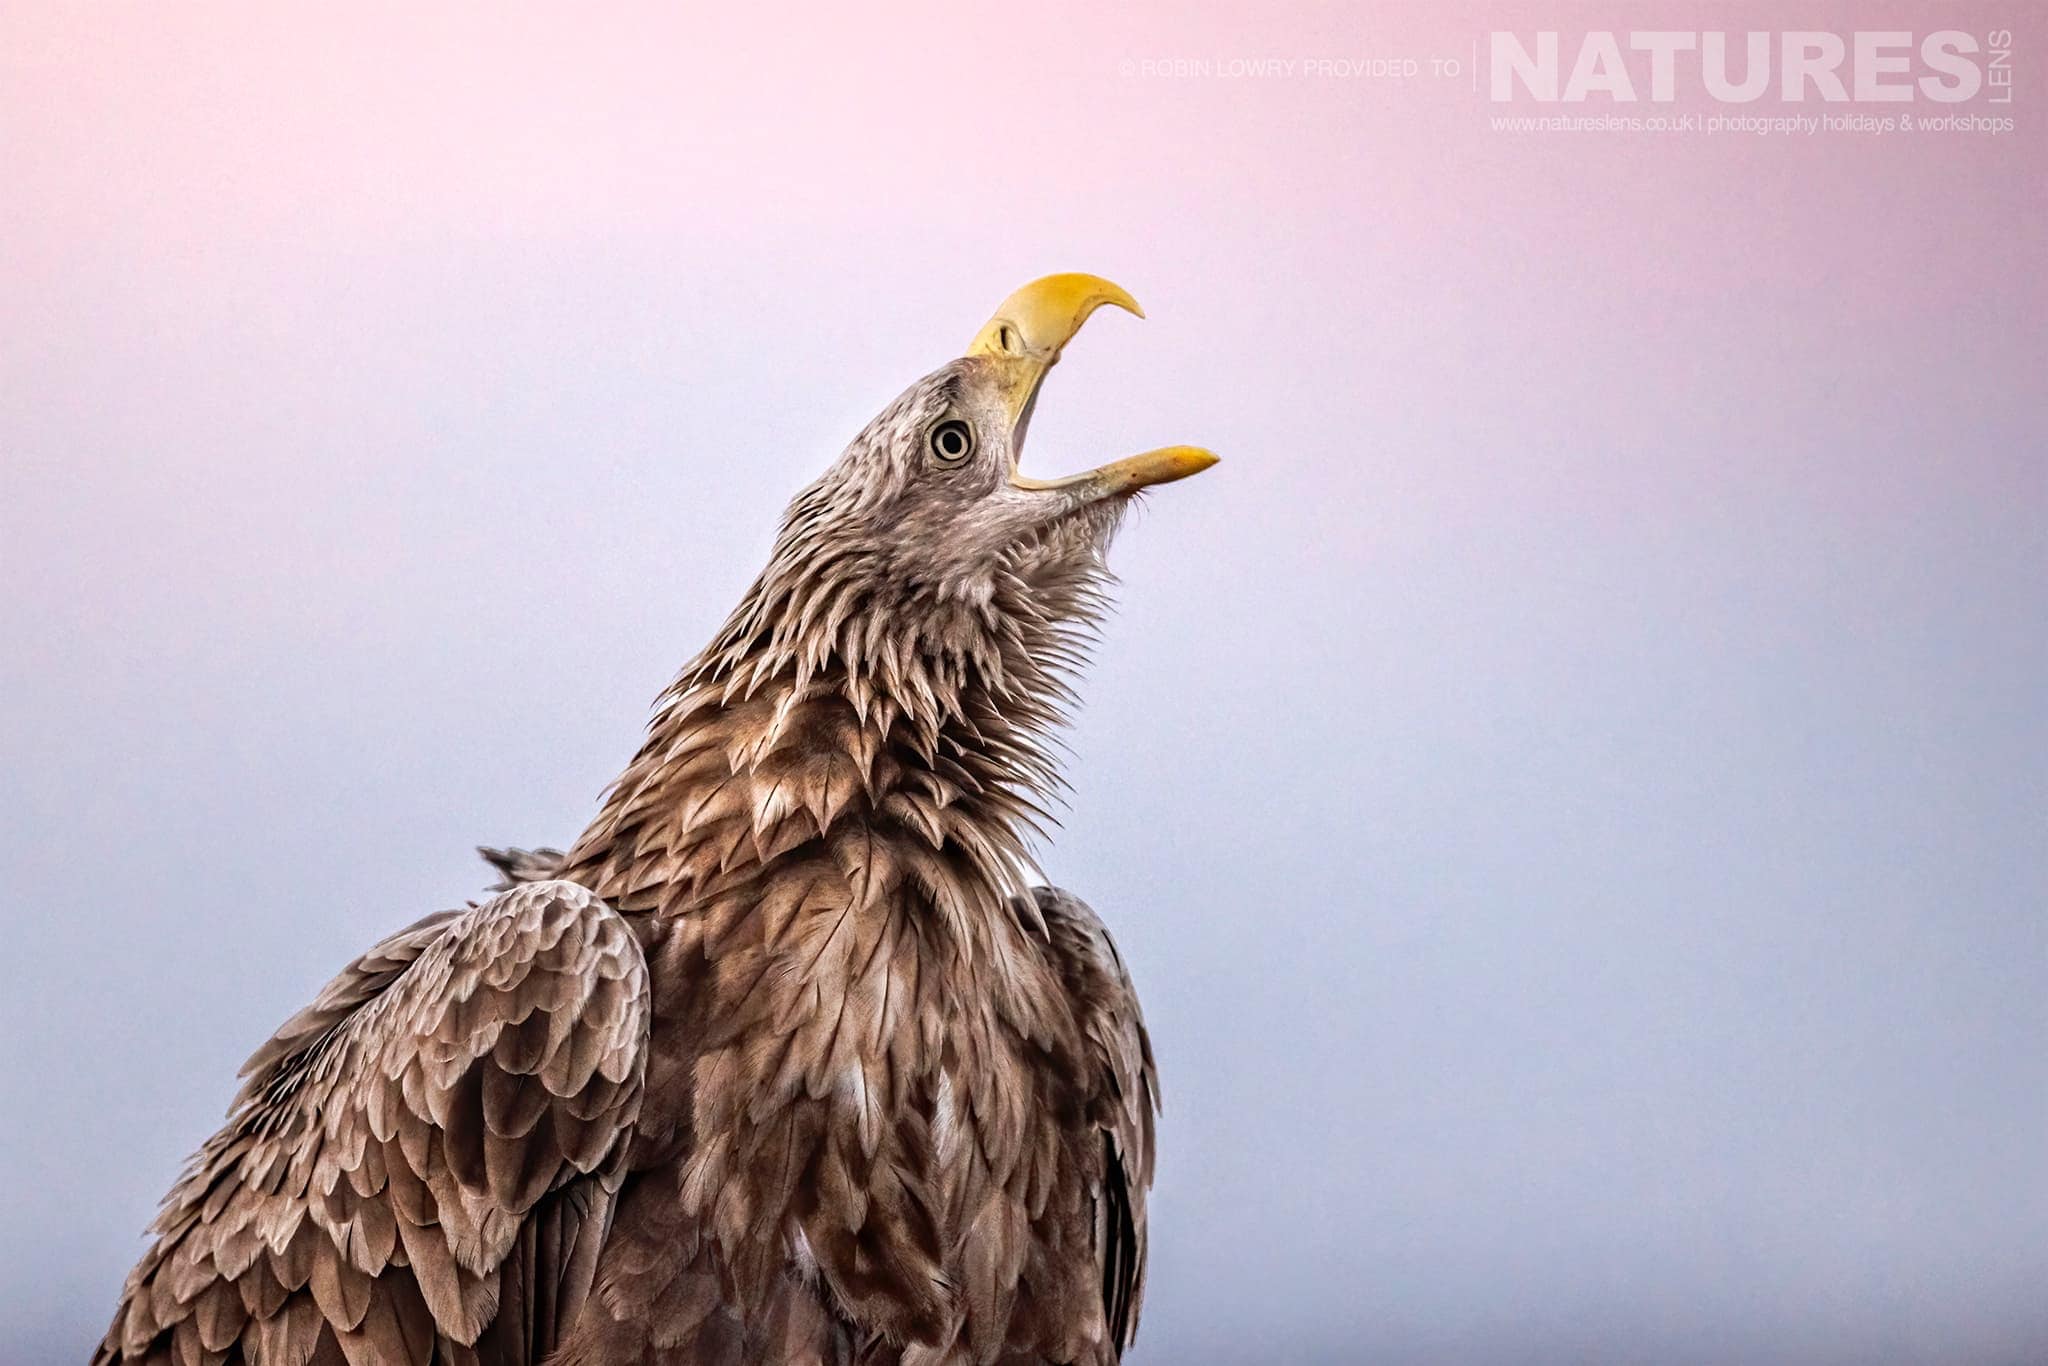 One Of The White Tailed Eagles The Largest Bird Species Found Amongst The Wildlife Of The Hortobágy National Park In Hungary